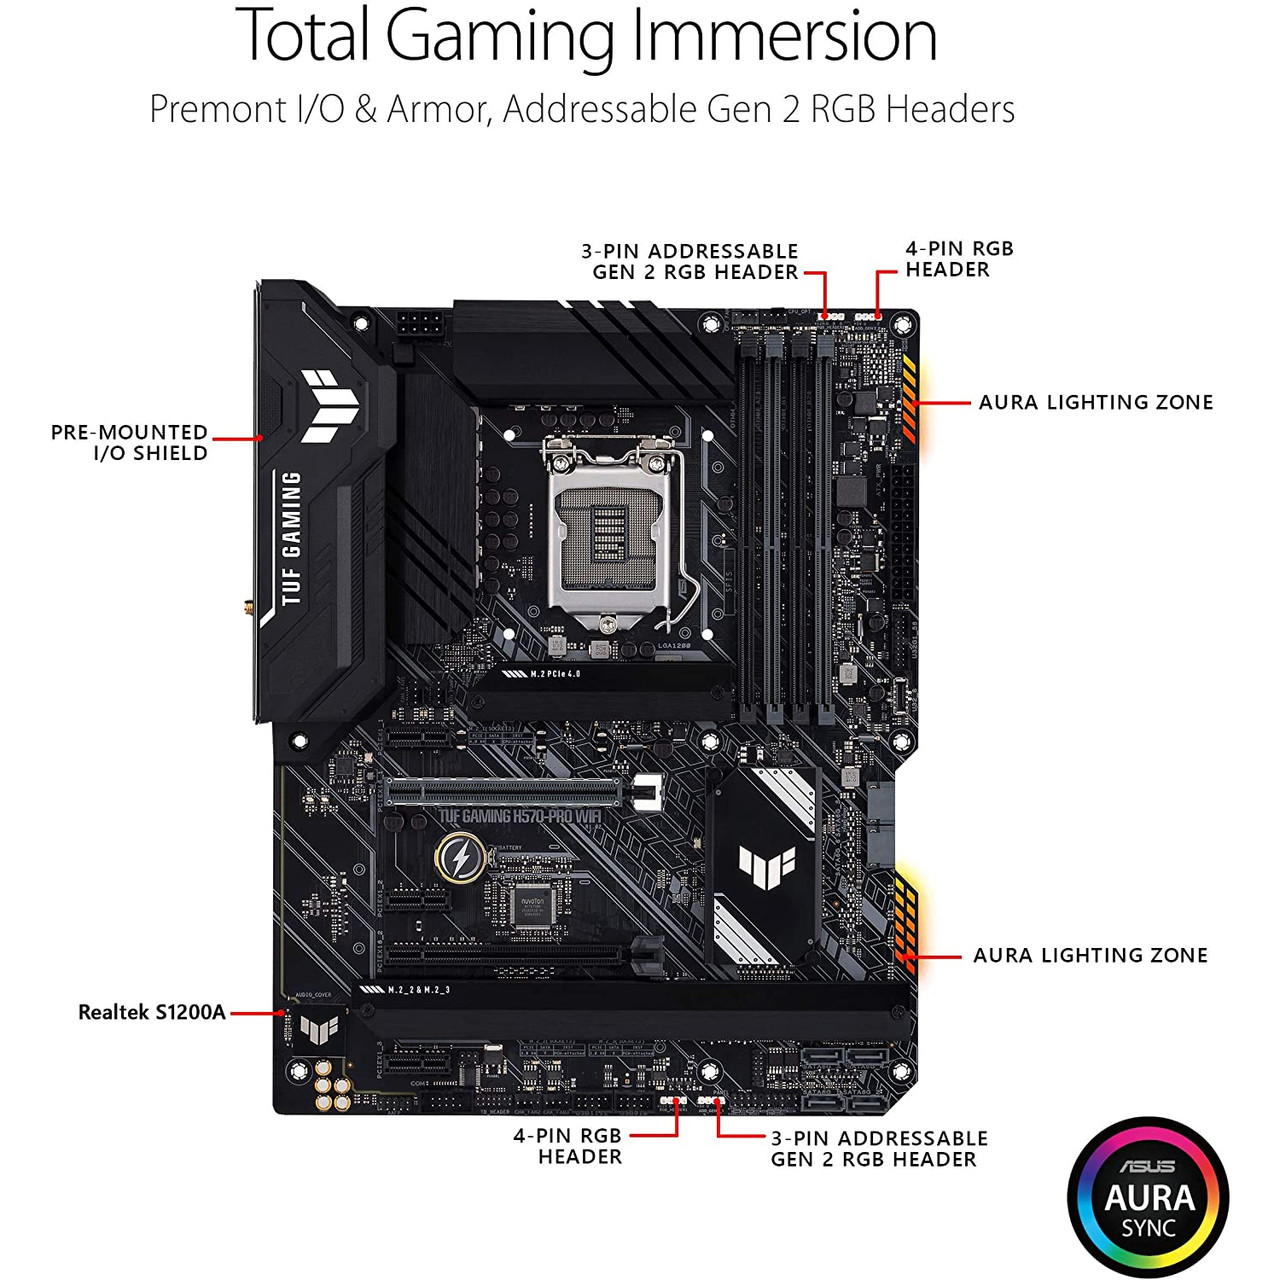 ASUS TUF GAMING H570-PRO WIFI LGA1200 ATX Gaming Motherboard PCIe 4.0, WiFi 6, 3xM.2 Slots,Front Thunderbolt 4 Support